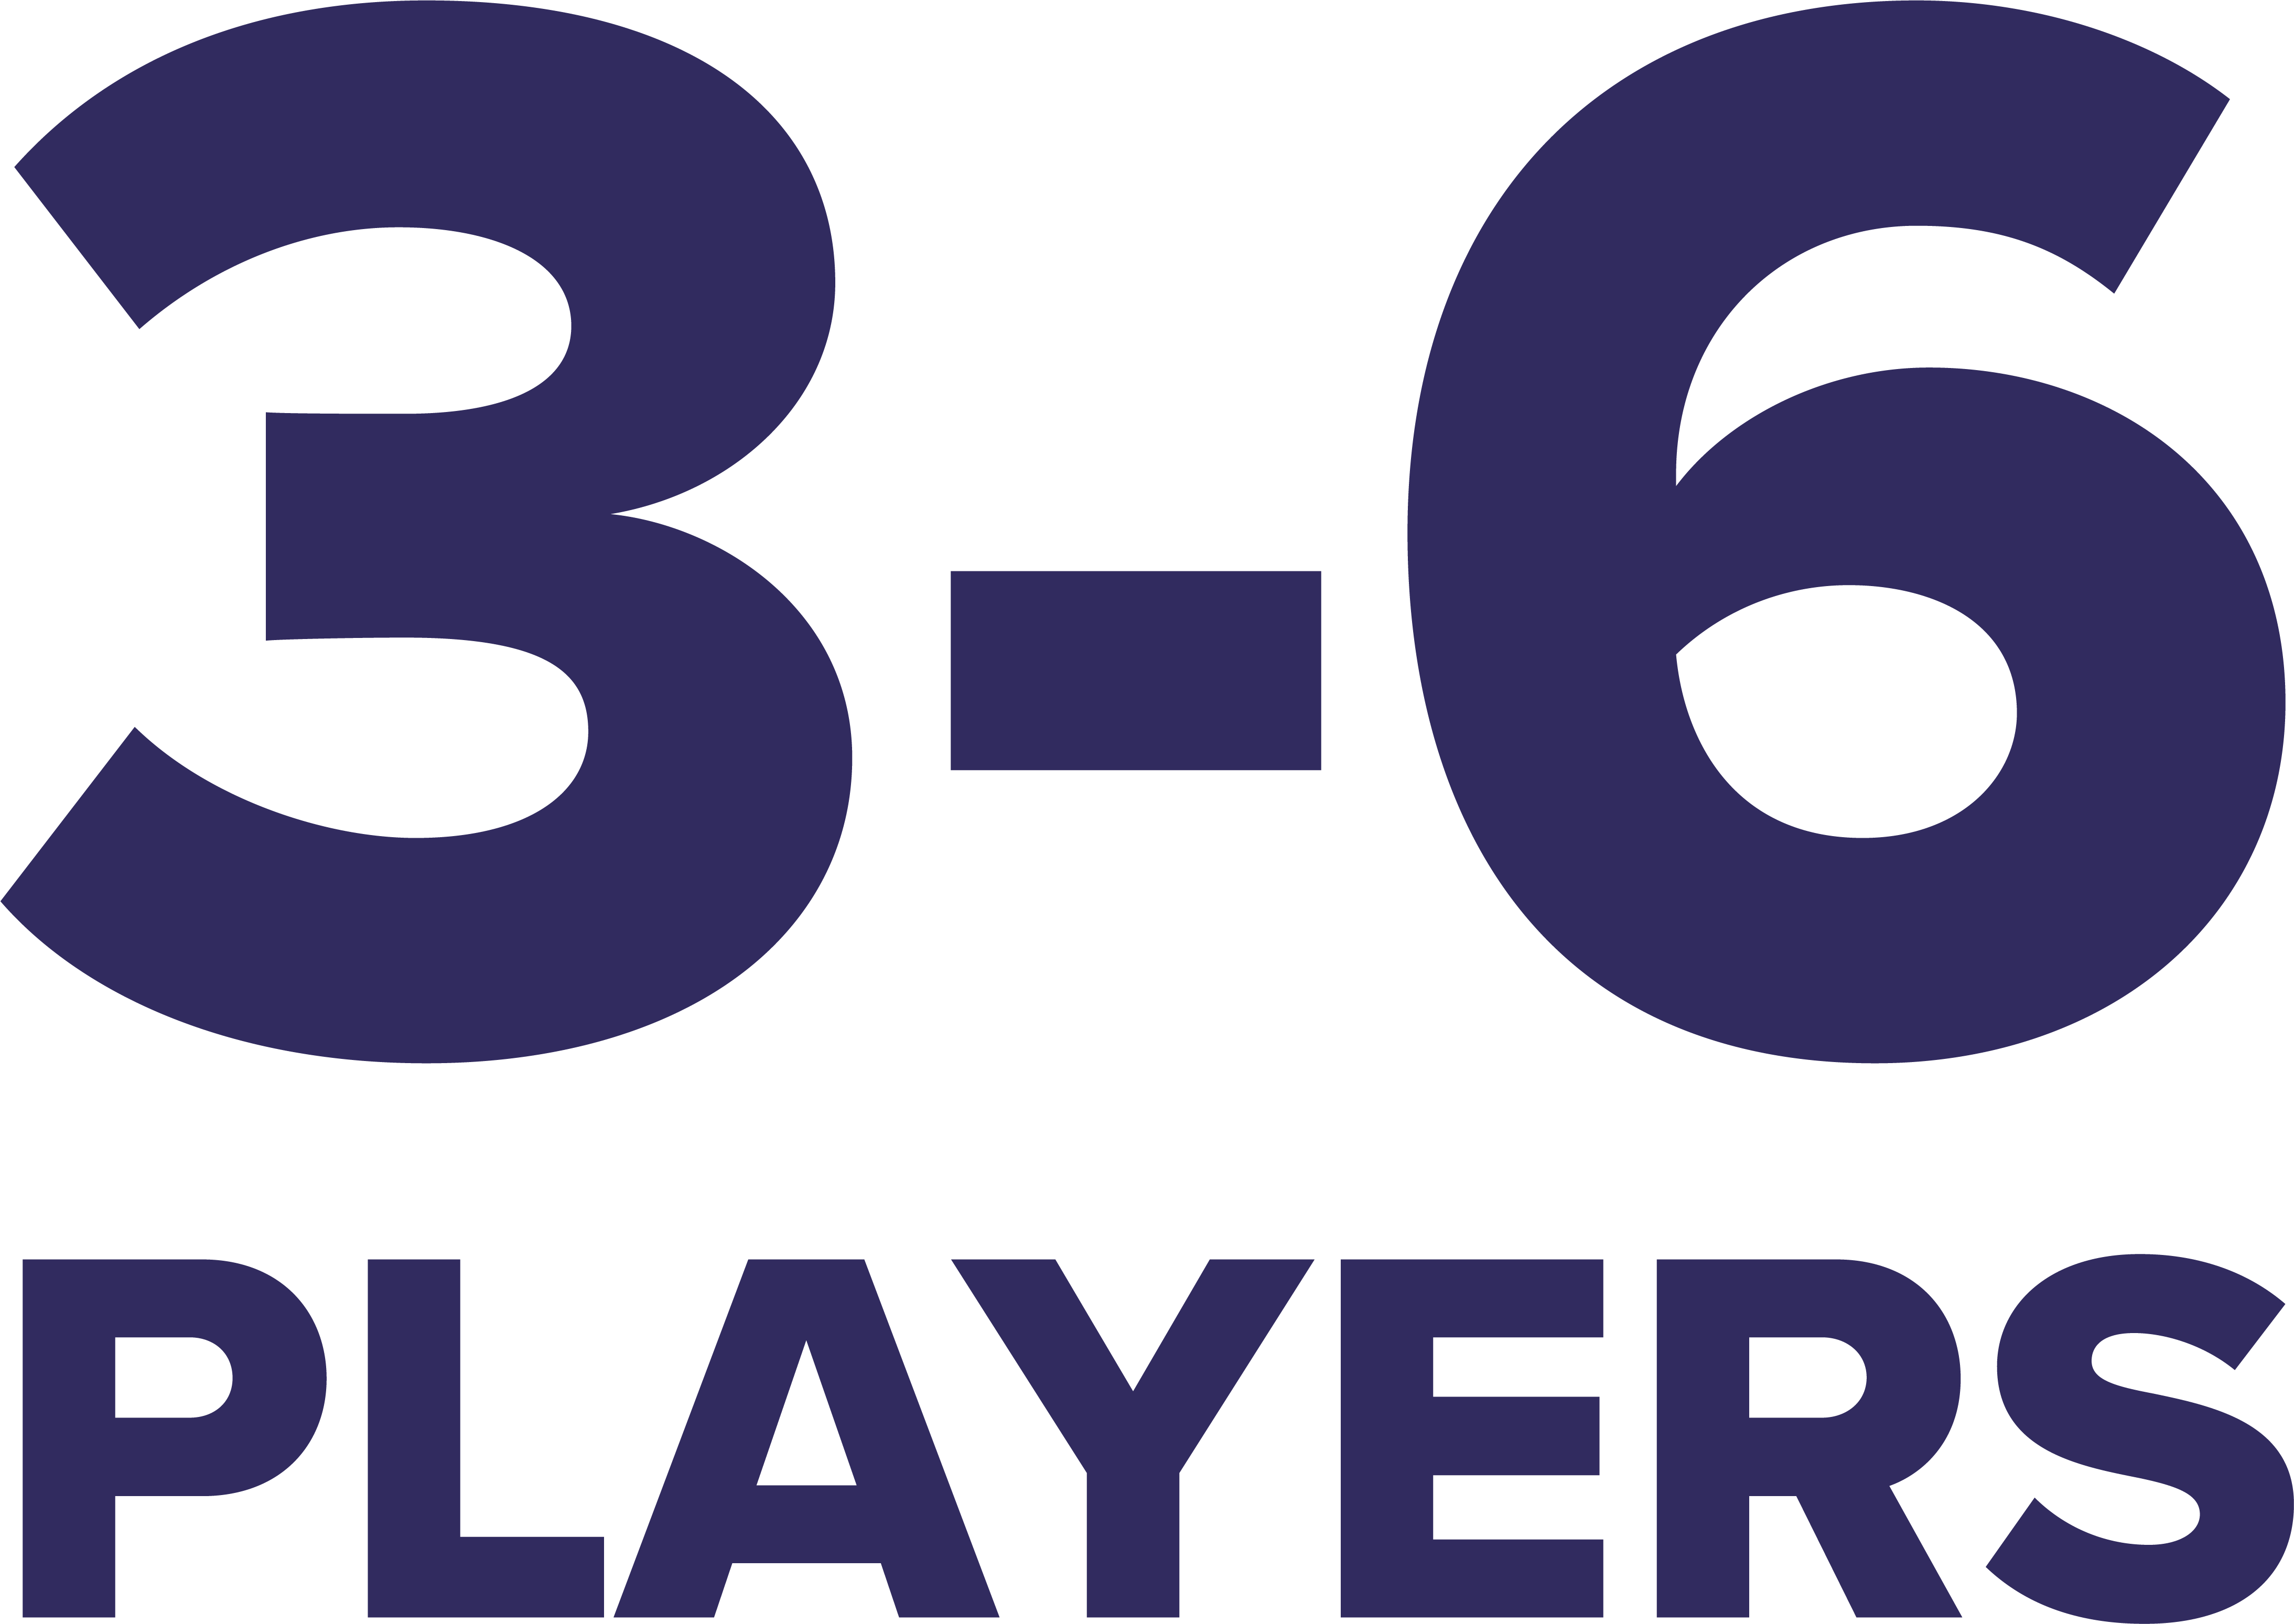 3-6 Players